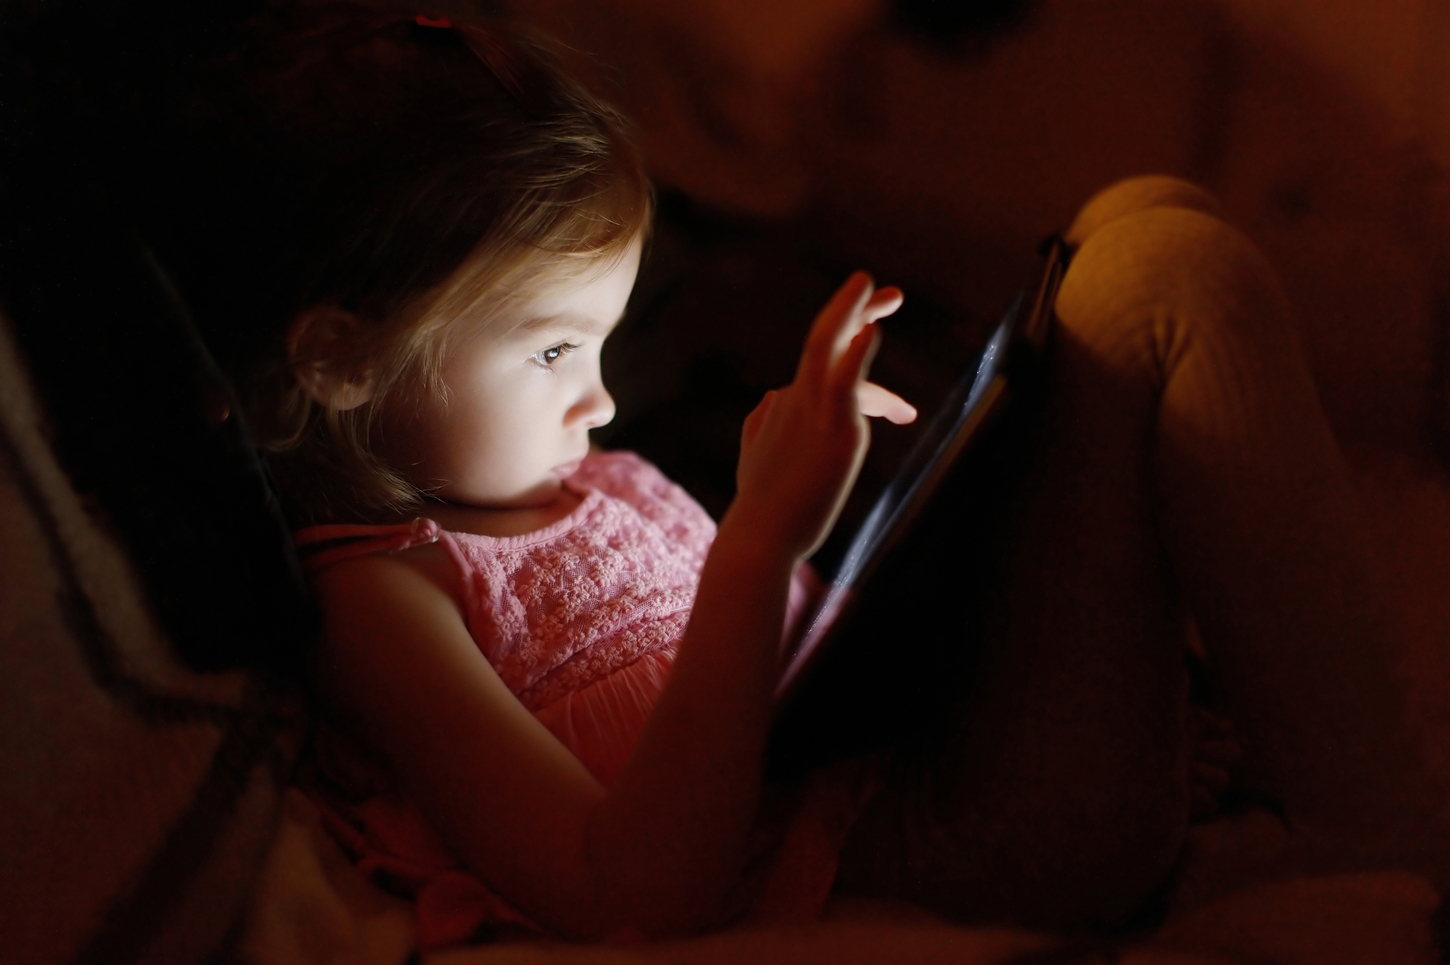 Kids Don't Sleep As Well After Screen Time